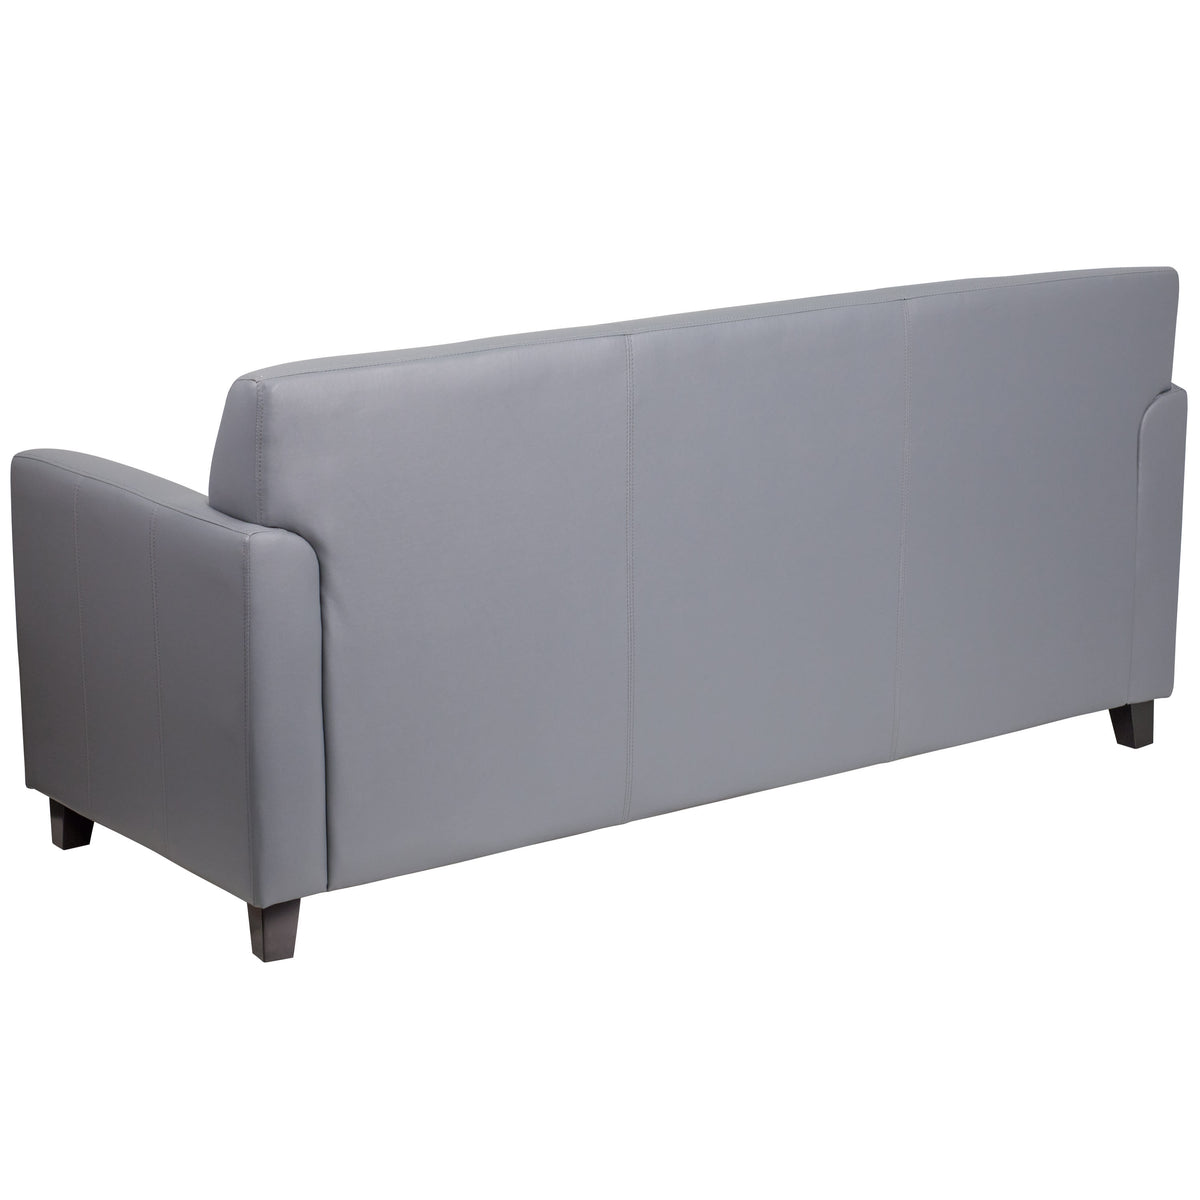 Gray |#| Gray LeatherSoft Sofa with Clean Line Stitched Frame - Reception Seating